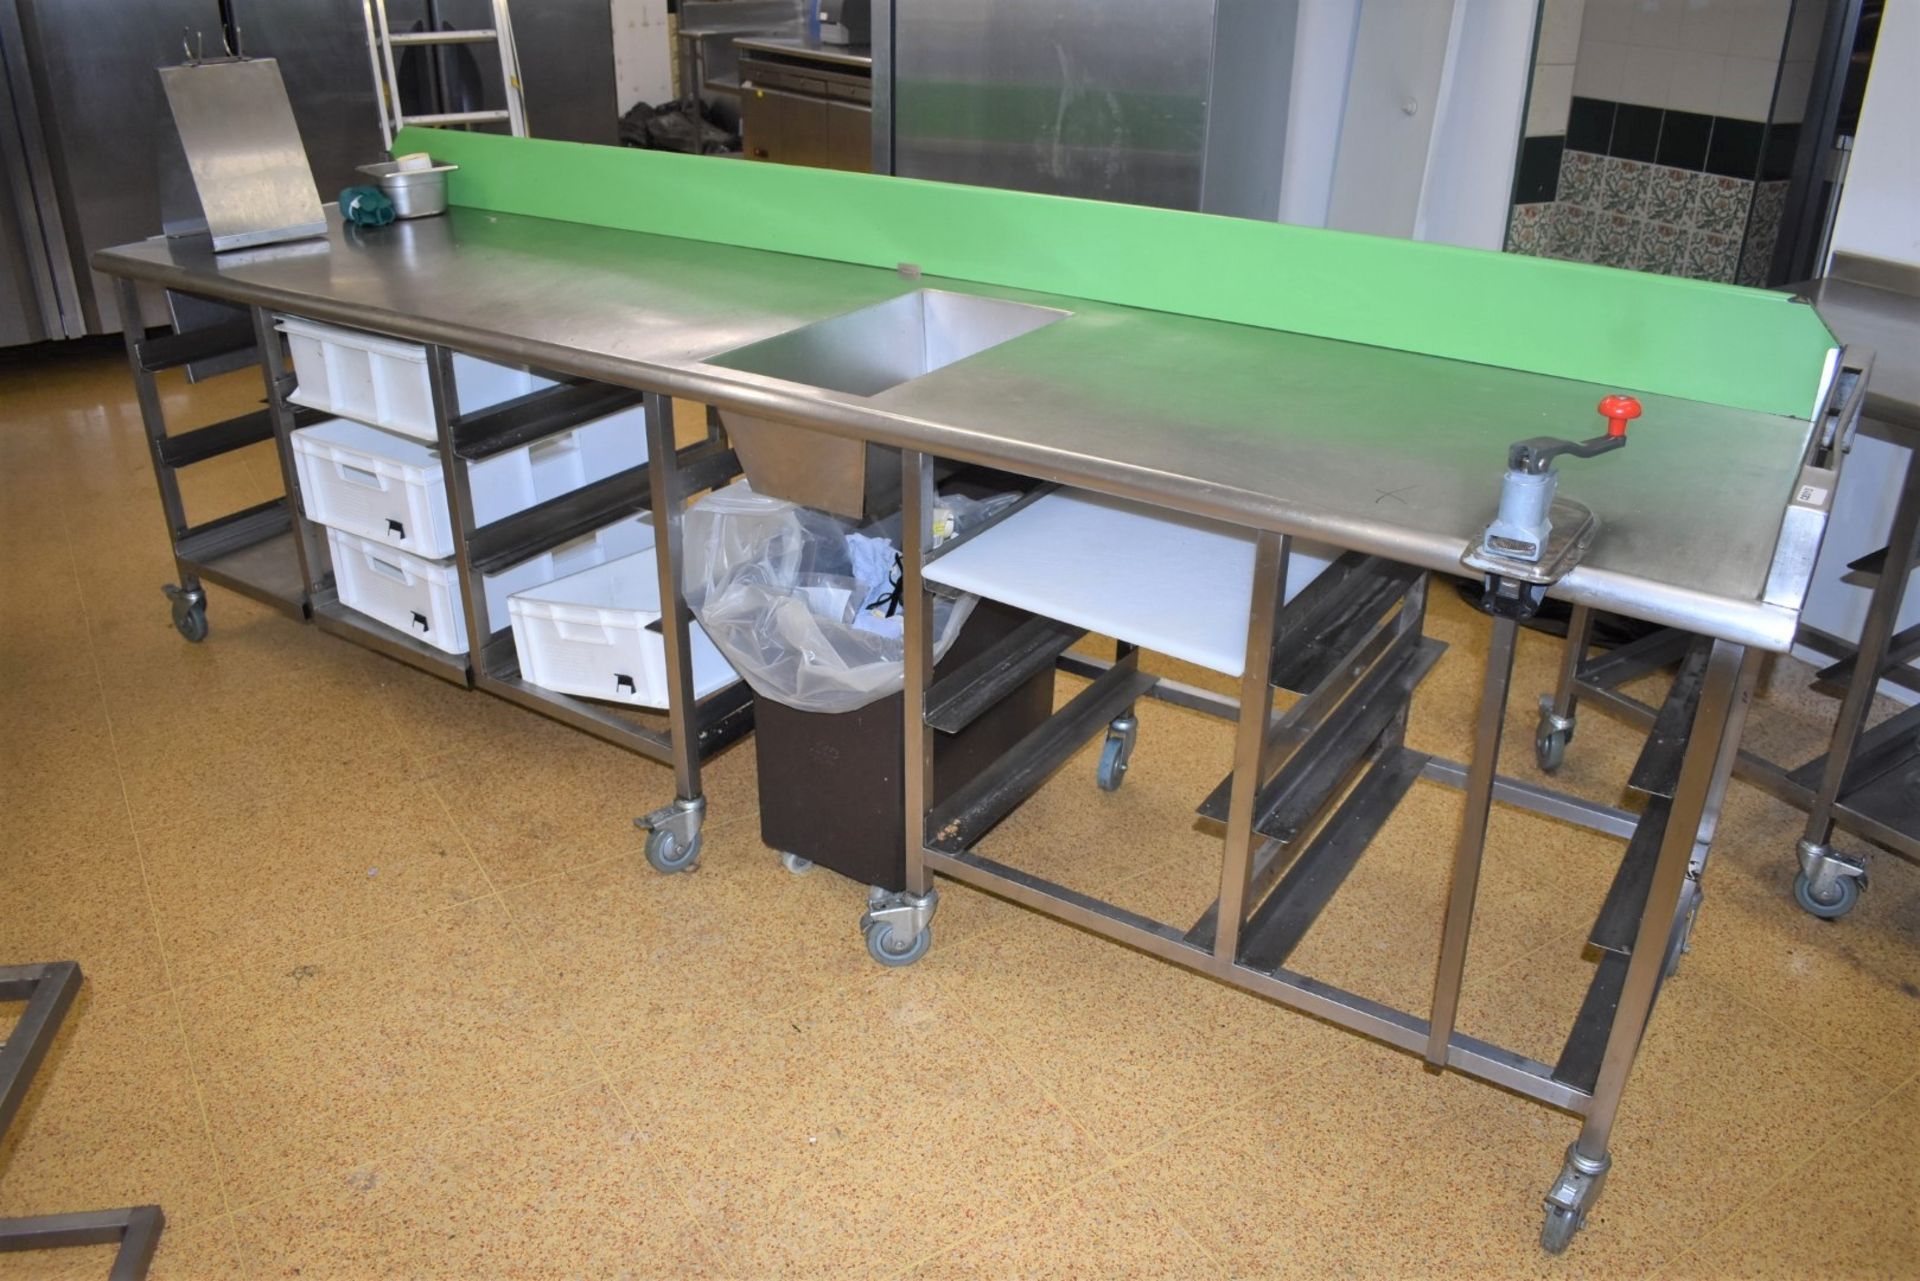 1 x Large Stainless Steel Prep Bench With Bin Chute, Tray Stands, Upstand, Knife Block and